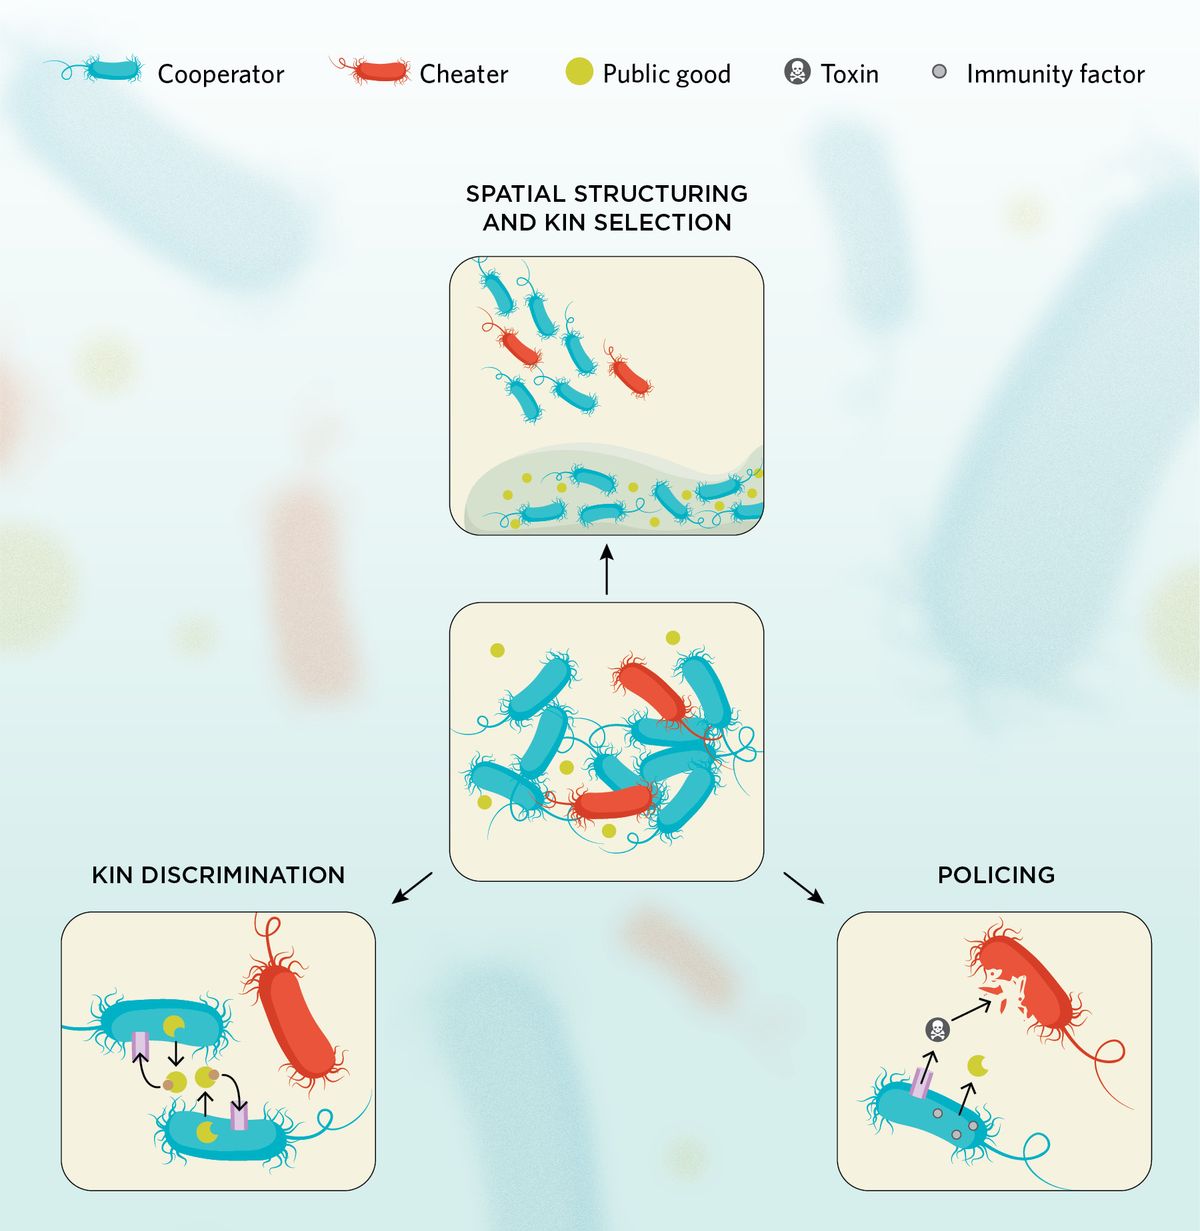 Infographic showing strategies used by cooperators to curb the cheater population in a bacterial community